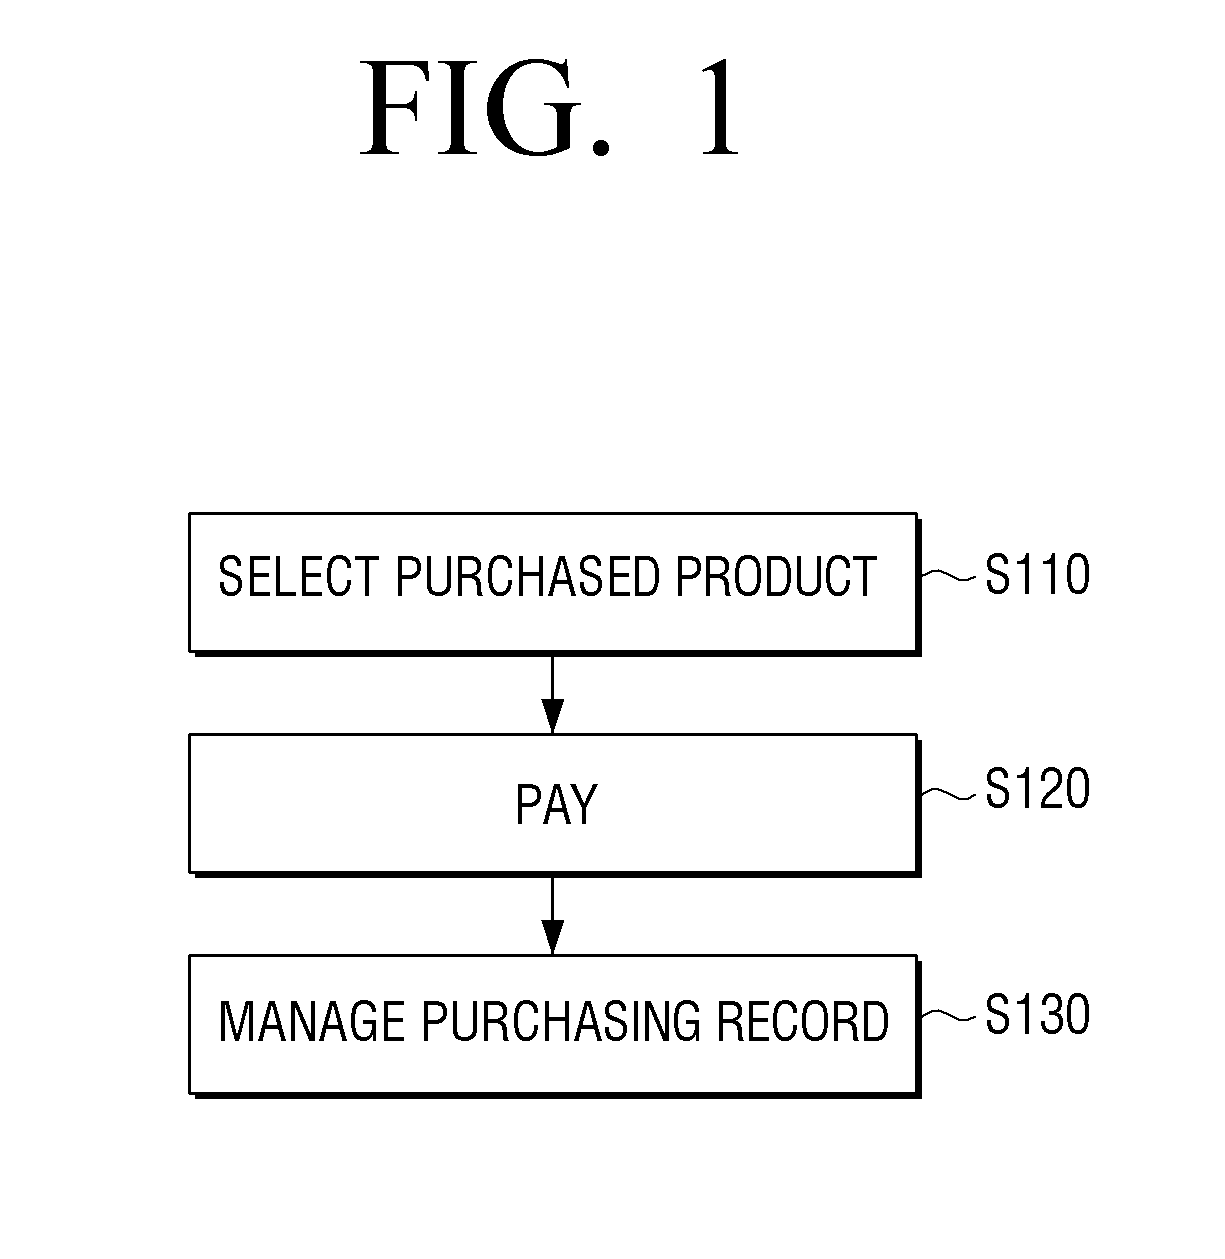 User terminal device for providing electronic shopping service and methods thereof